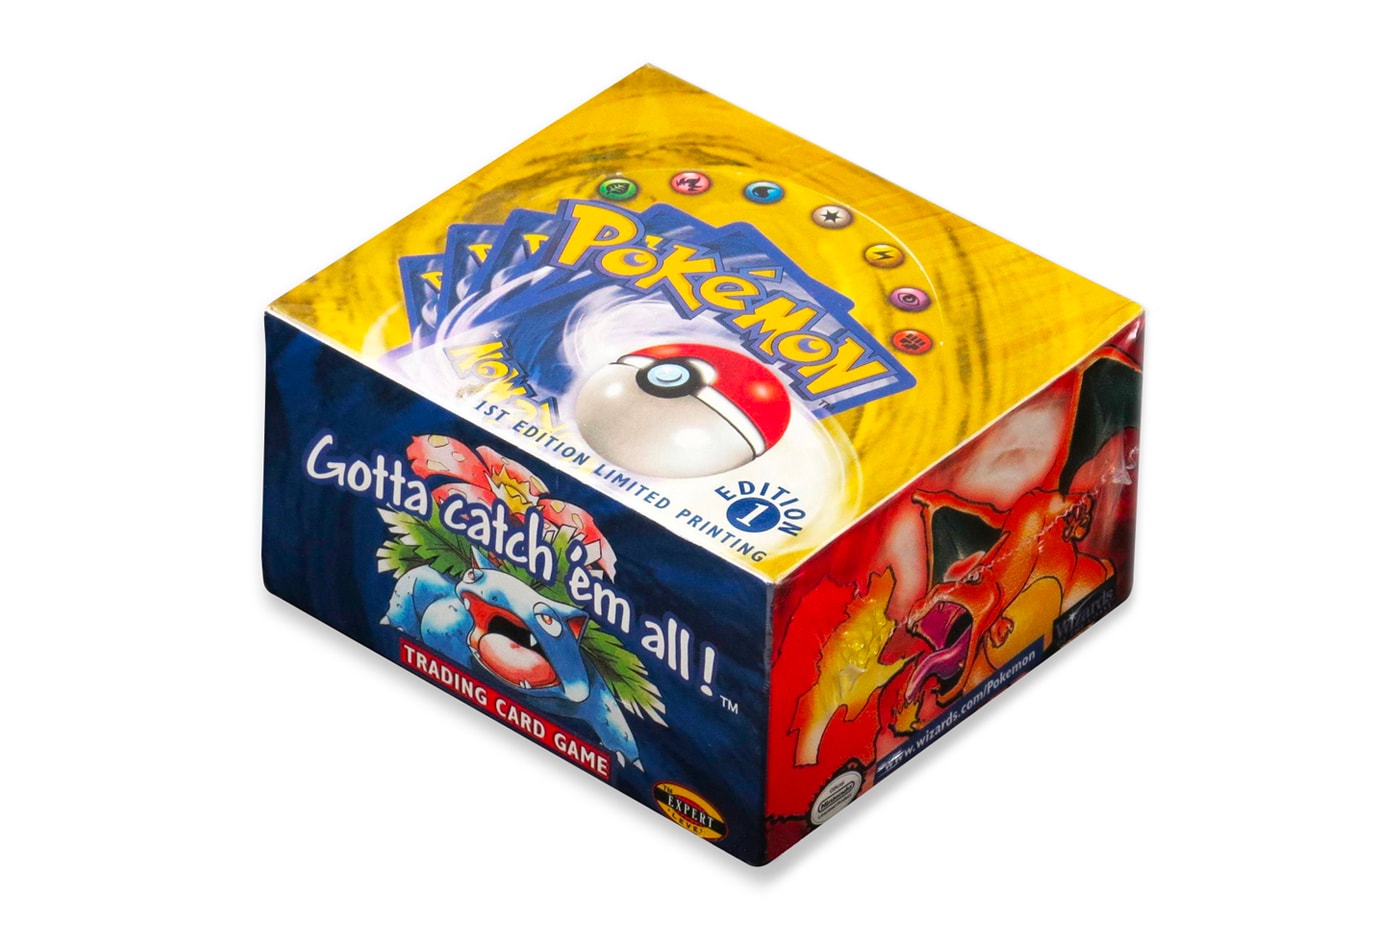 Pre Auction Rare Pokemon Box Set 300000 USD dollars charizard gotta catch em all booster pack gem mint condition heritage auctions